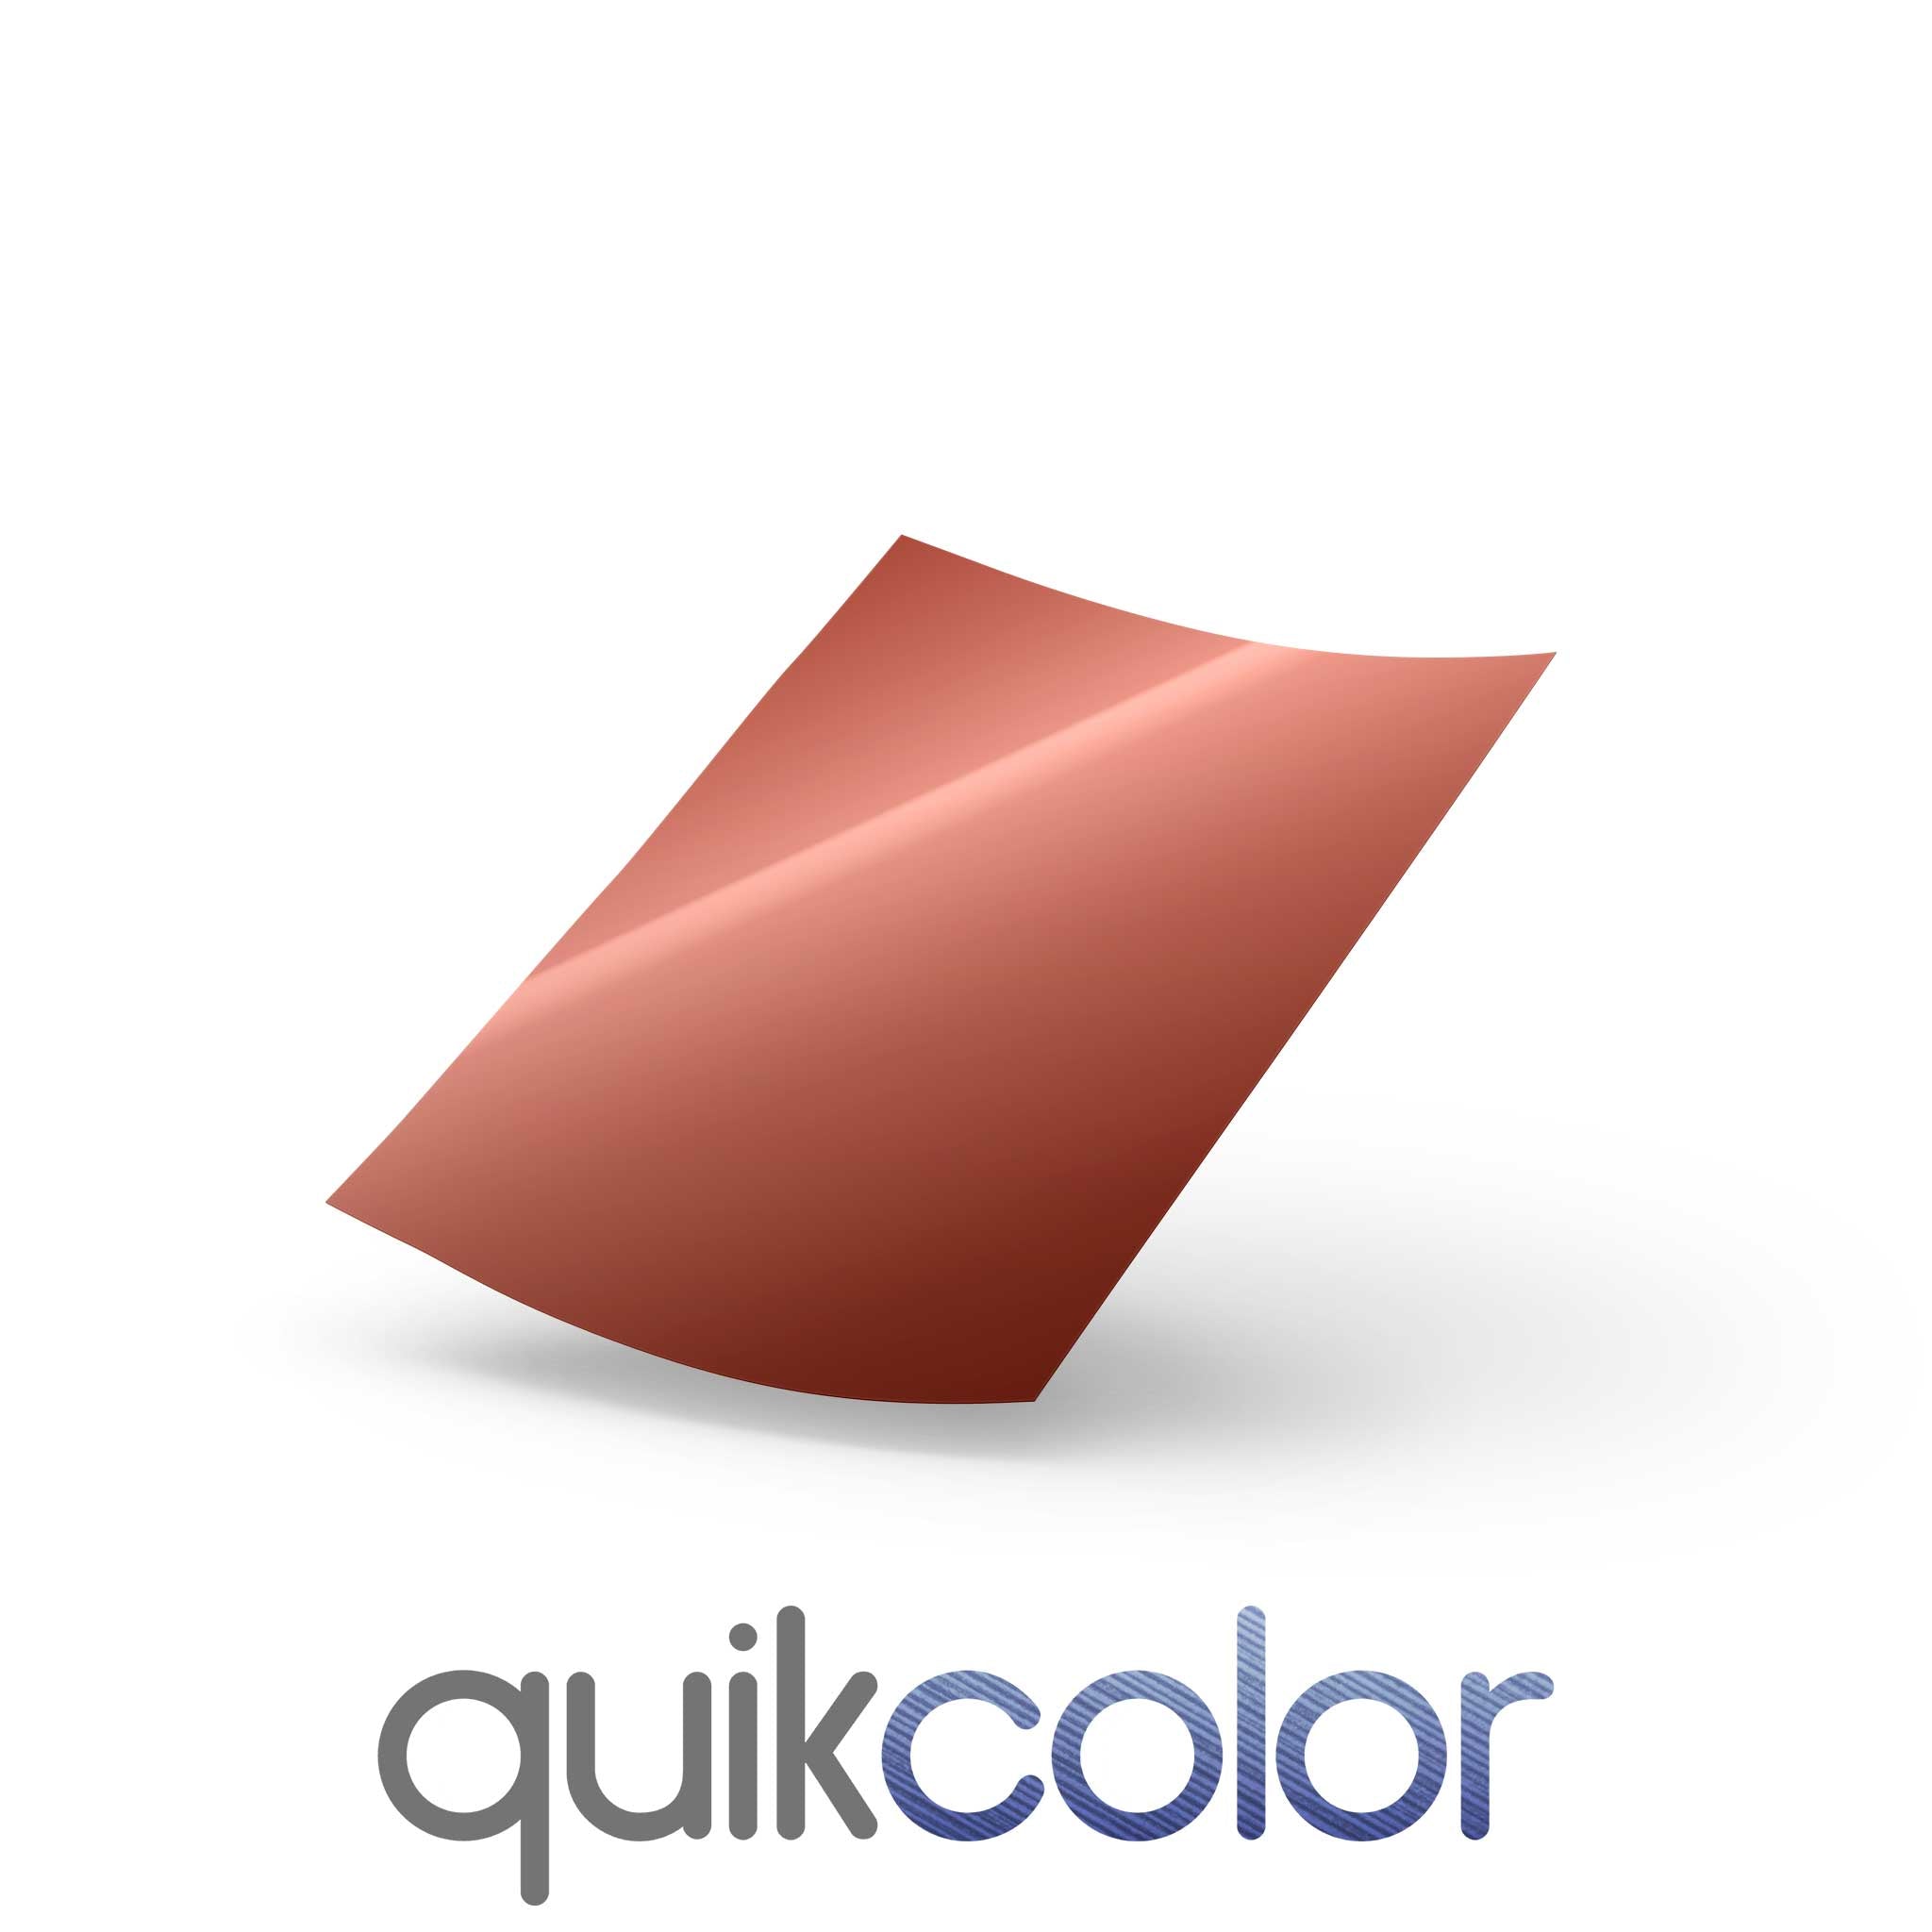 Quikcolor Metallic Hard Surface 1-Step Transfer Media for Ceramic, Glass and Metal - 0